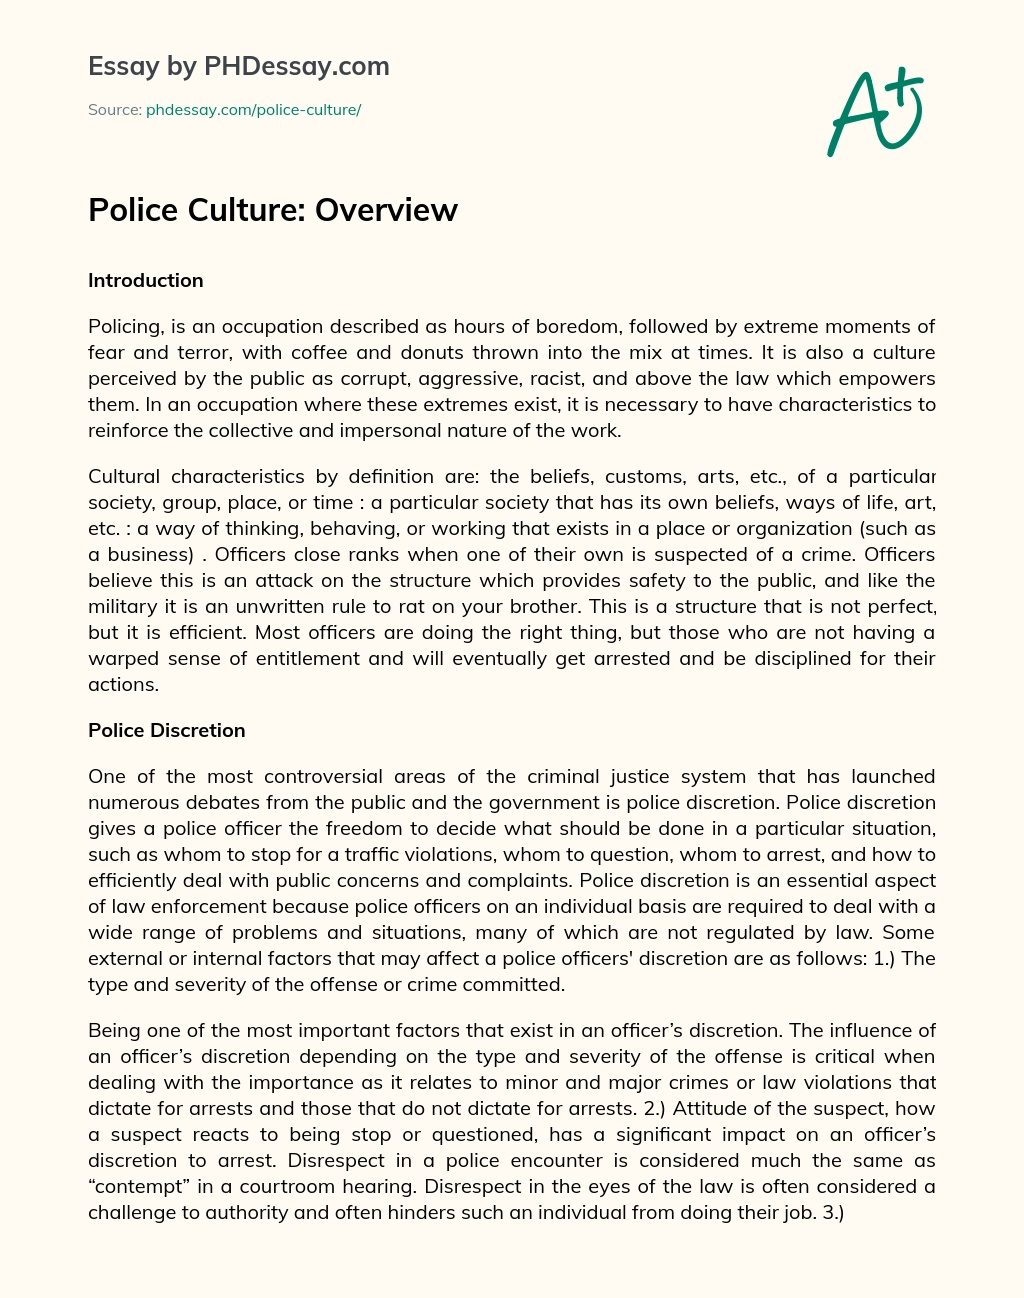 Police Culture: Overview essay